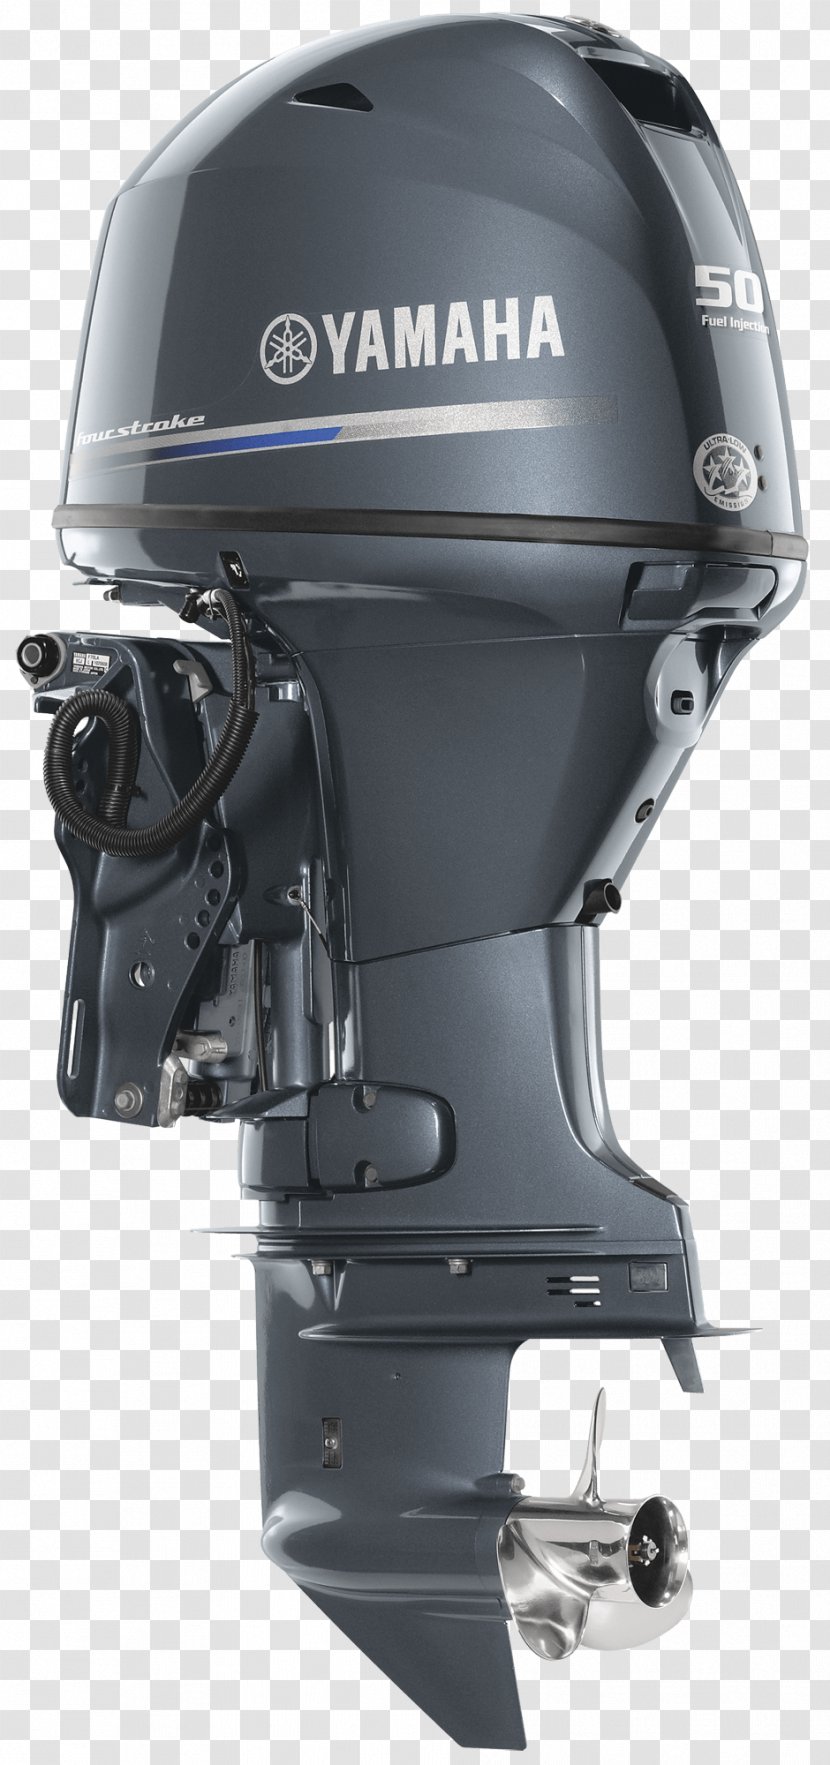 Yamaha Motor Company Outboard Four-stroke Engine Boat - Motorcycle Accessories Transparent PNG